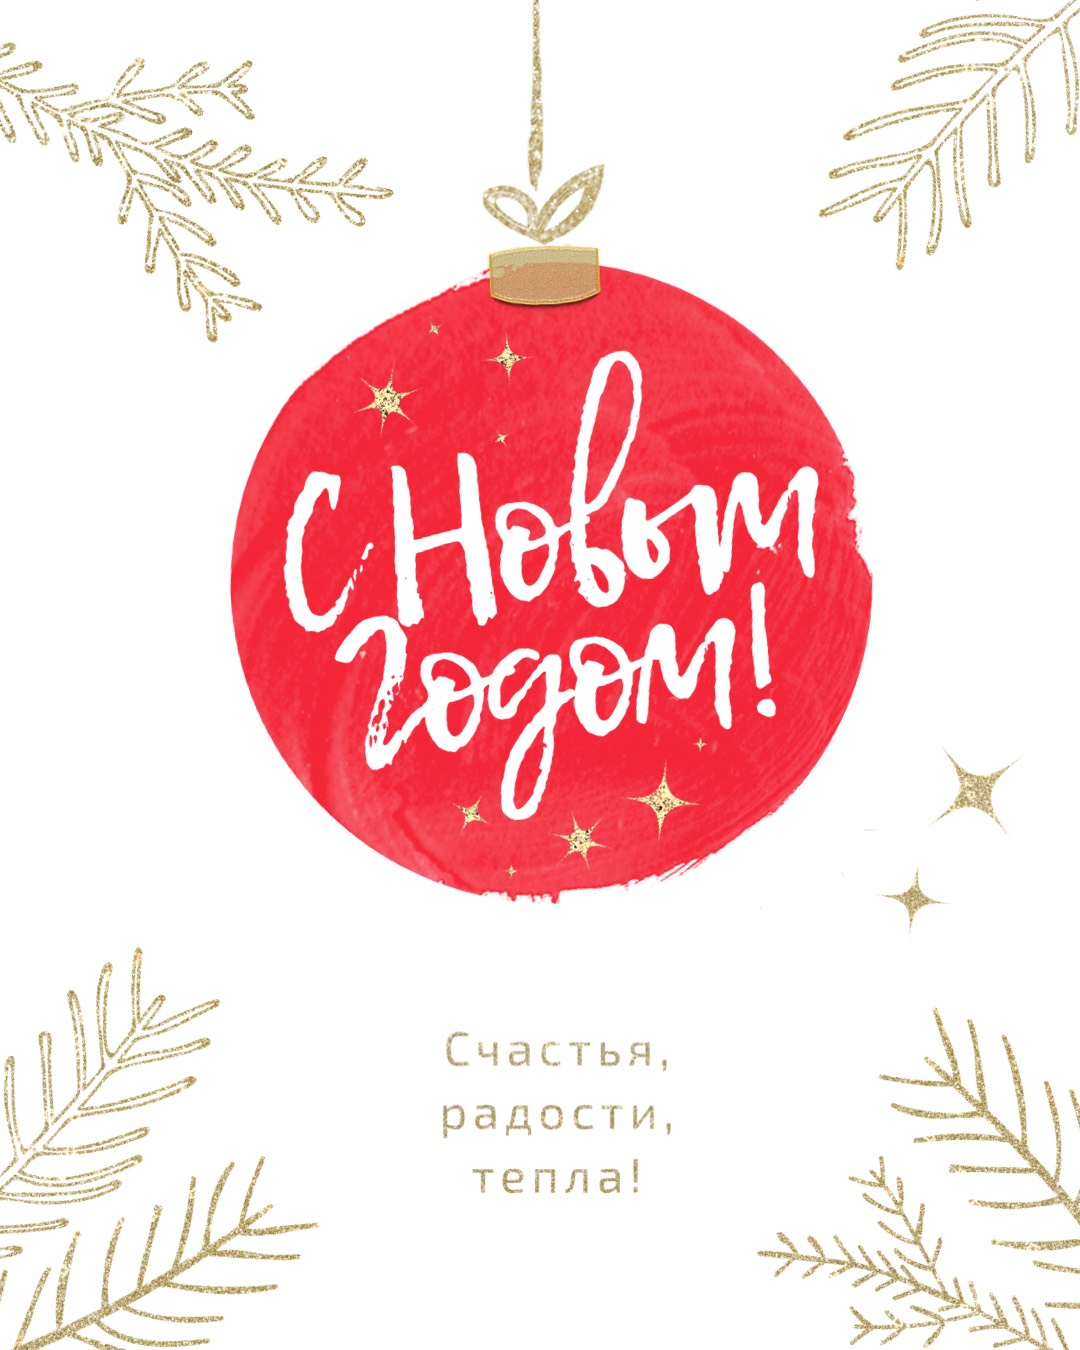 A Red Christmas Ornament With The Word'Hoboom'Written In Template